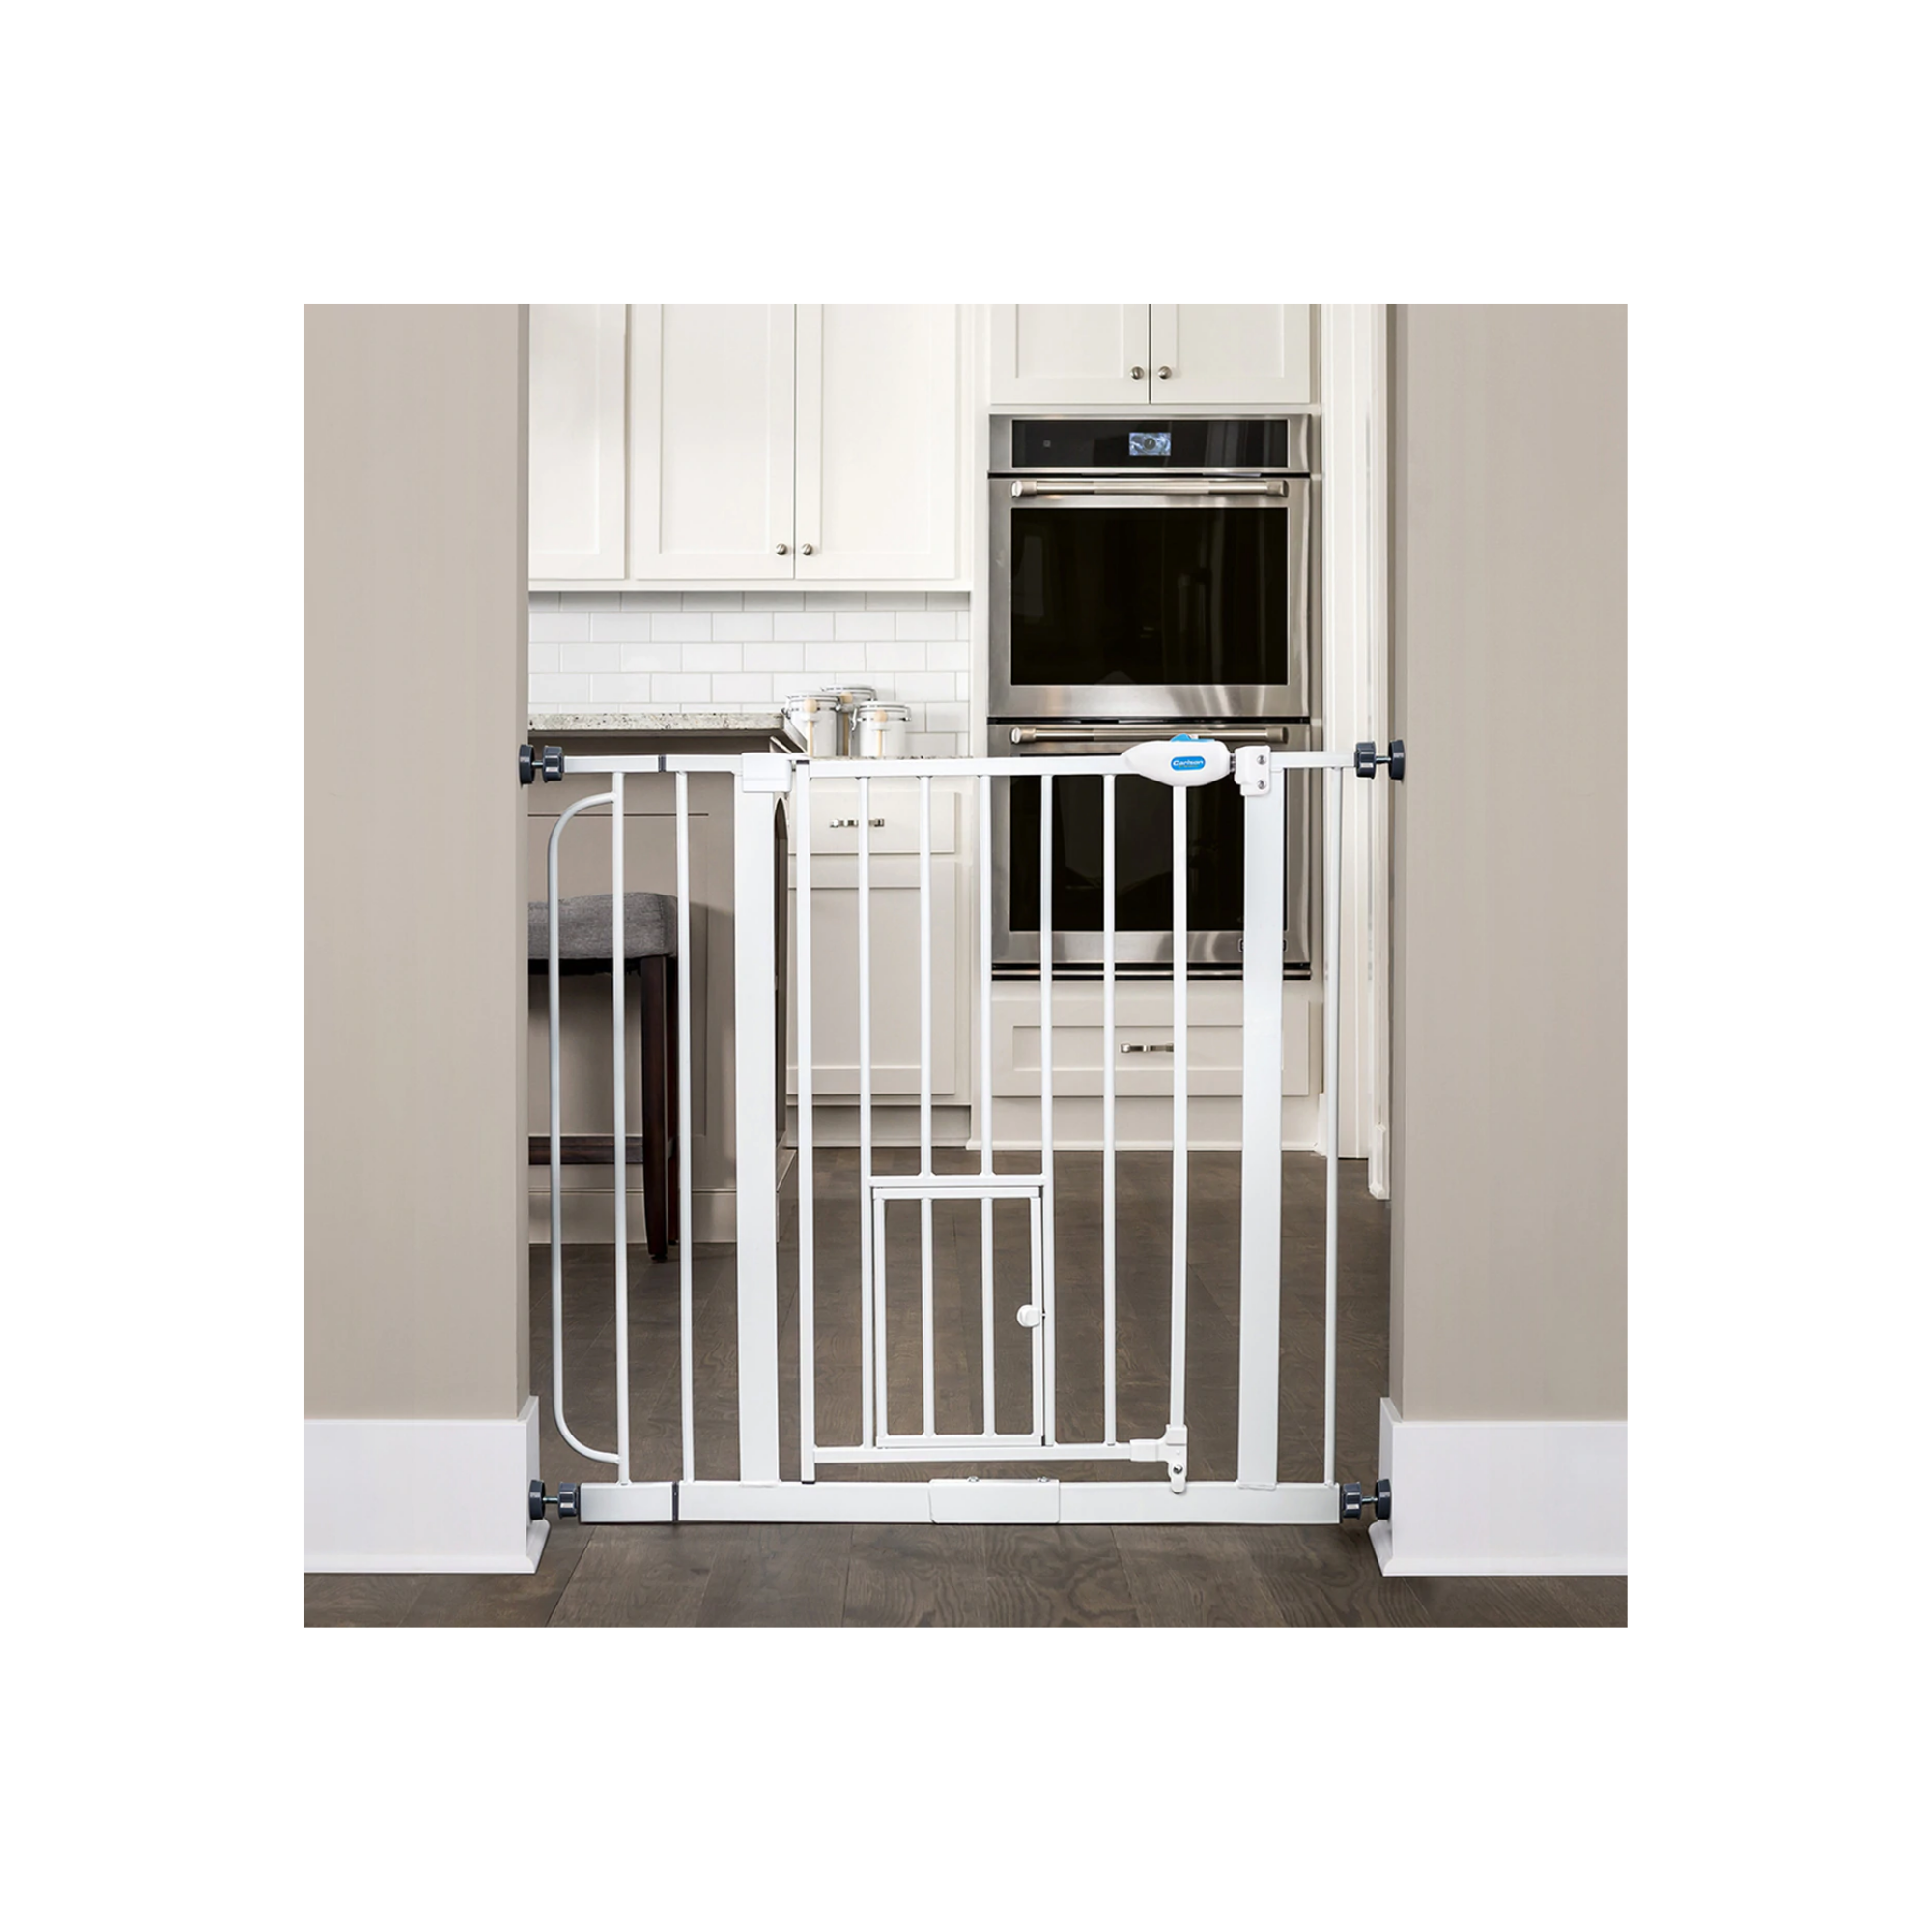 Walk Thru Baby Gates for Doorway and Stair Height 30 Ideal Barrier for Toddler and Small Dogs RONBEI Auto Close Pressure Mounted Wide Indoor Safety Gate for Opening 35-37.8 or 29.53-31.5